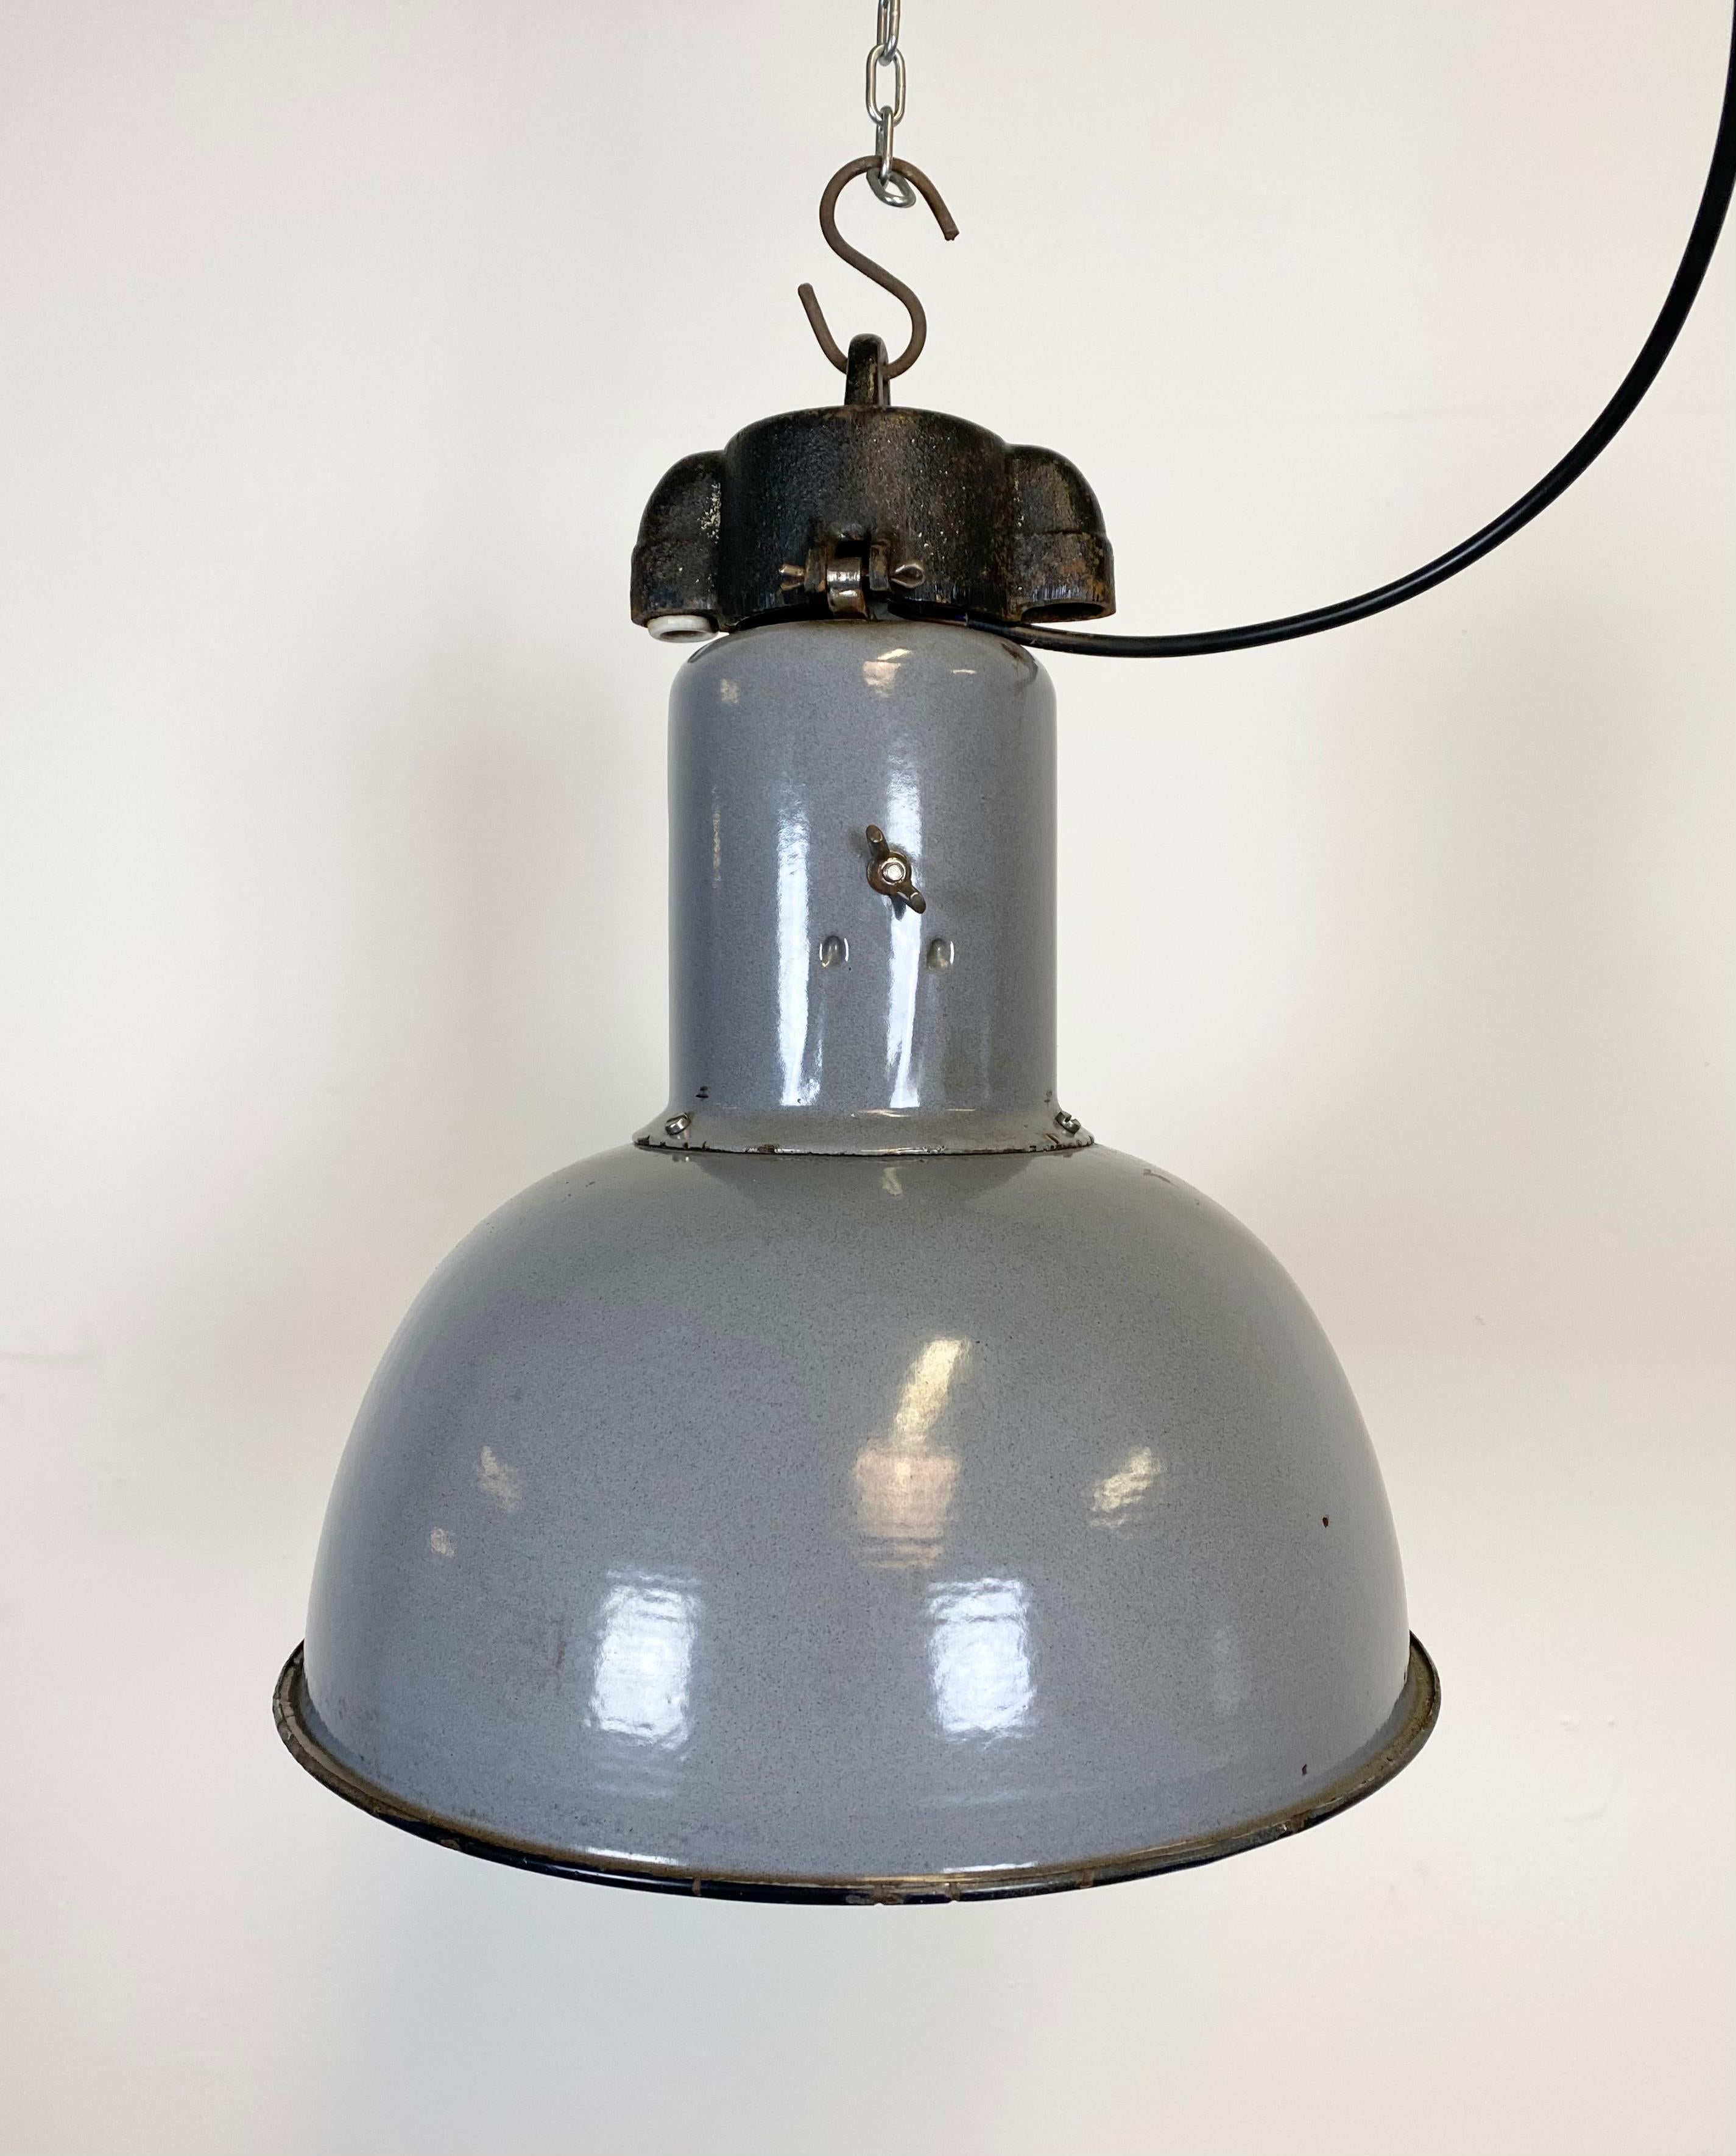 - Grey enamel pendant lamp 
- Made in former Czechoslovakia 
- Bauhaus style 
- Designed in the 1930s 
- White enamel interior 
- Cast iron top 
- New socket for E 27 ligtbulbs and wire.